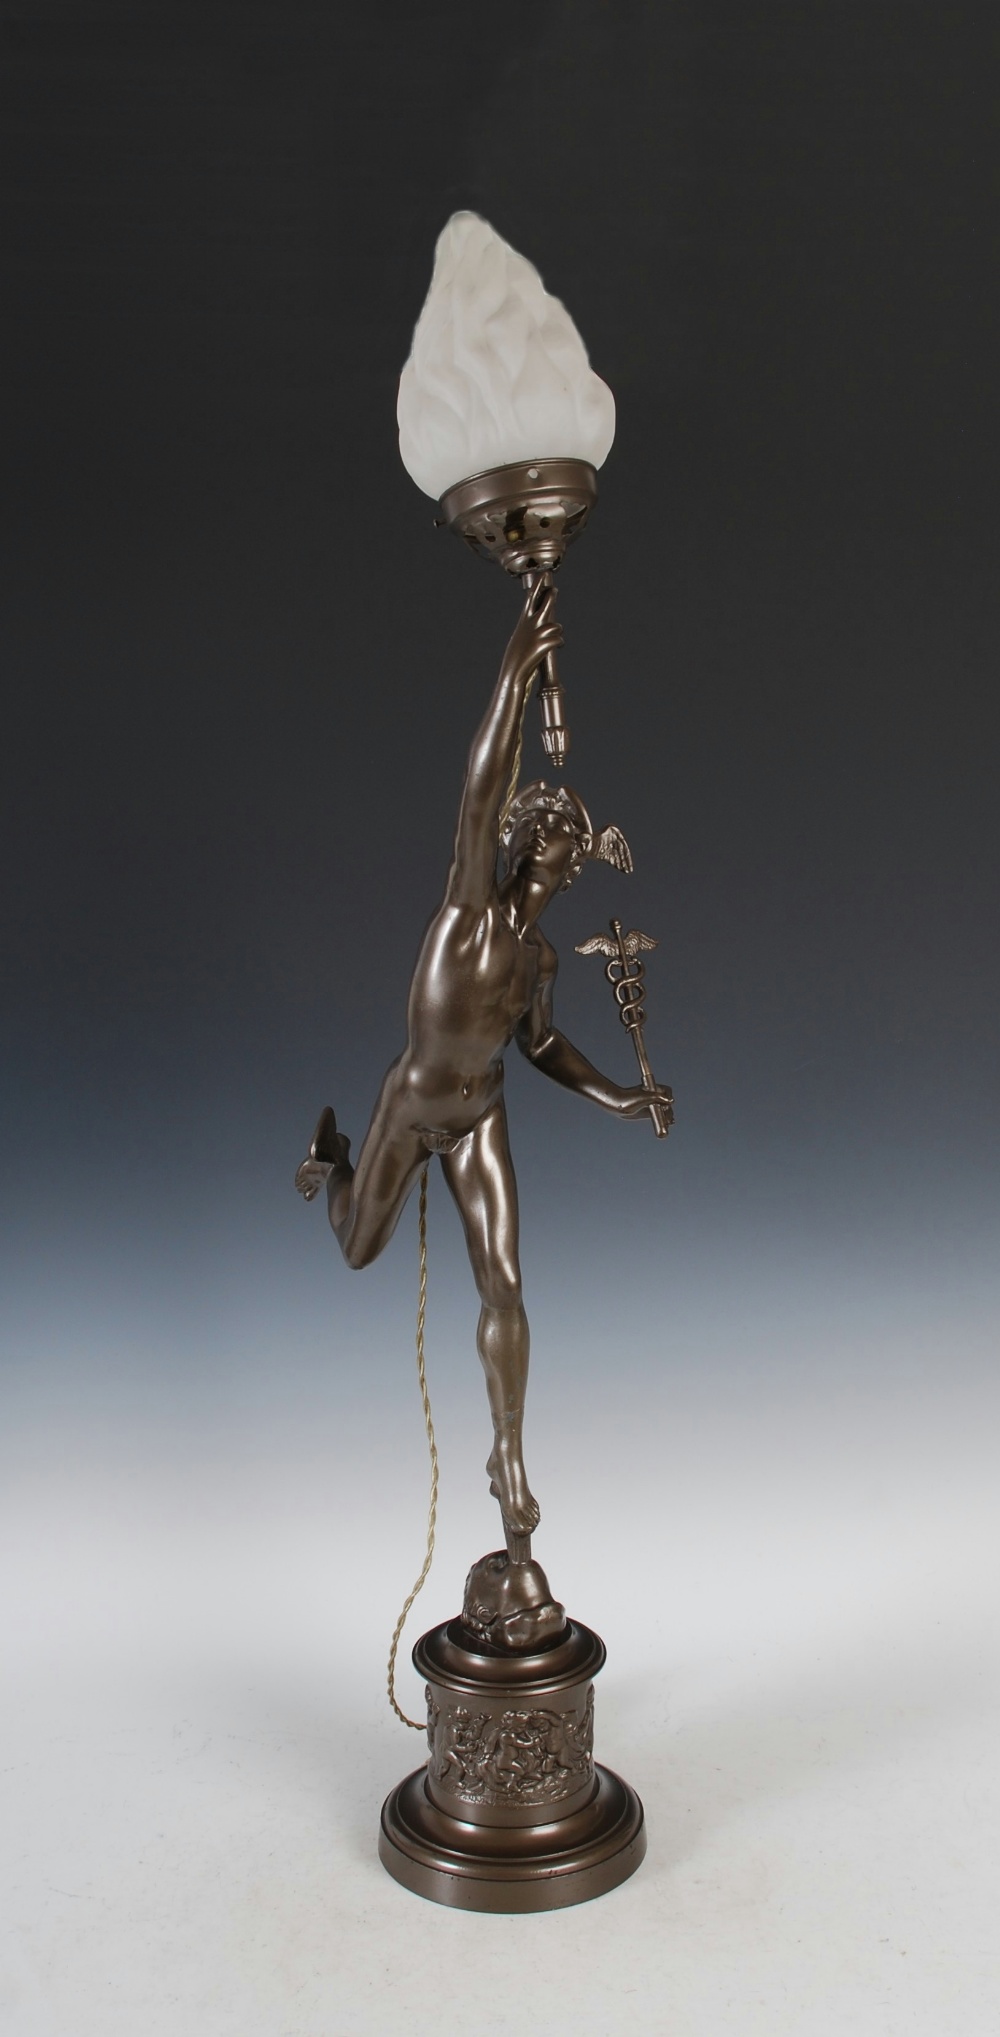 A bronzed spelter figure of Mercury after Giambologna, converted to accommodate a light fitting